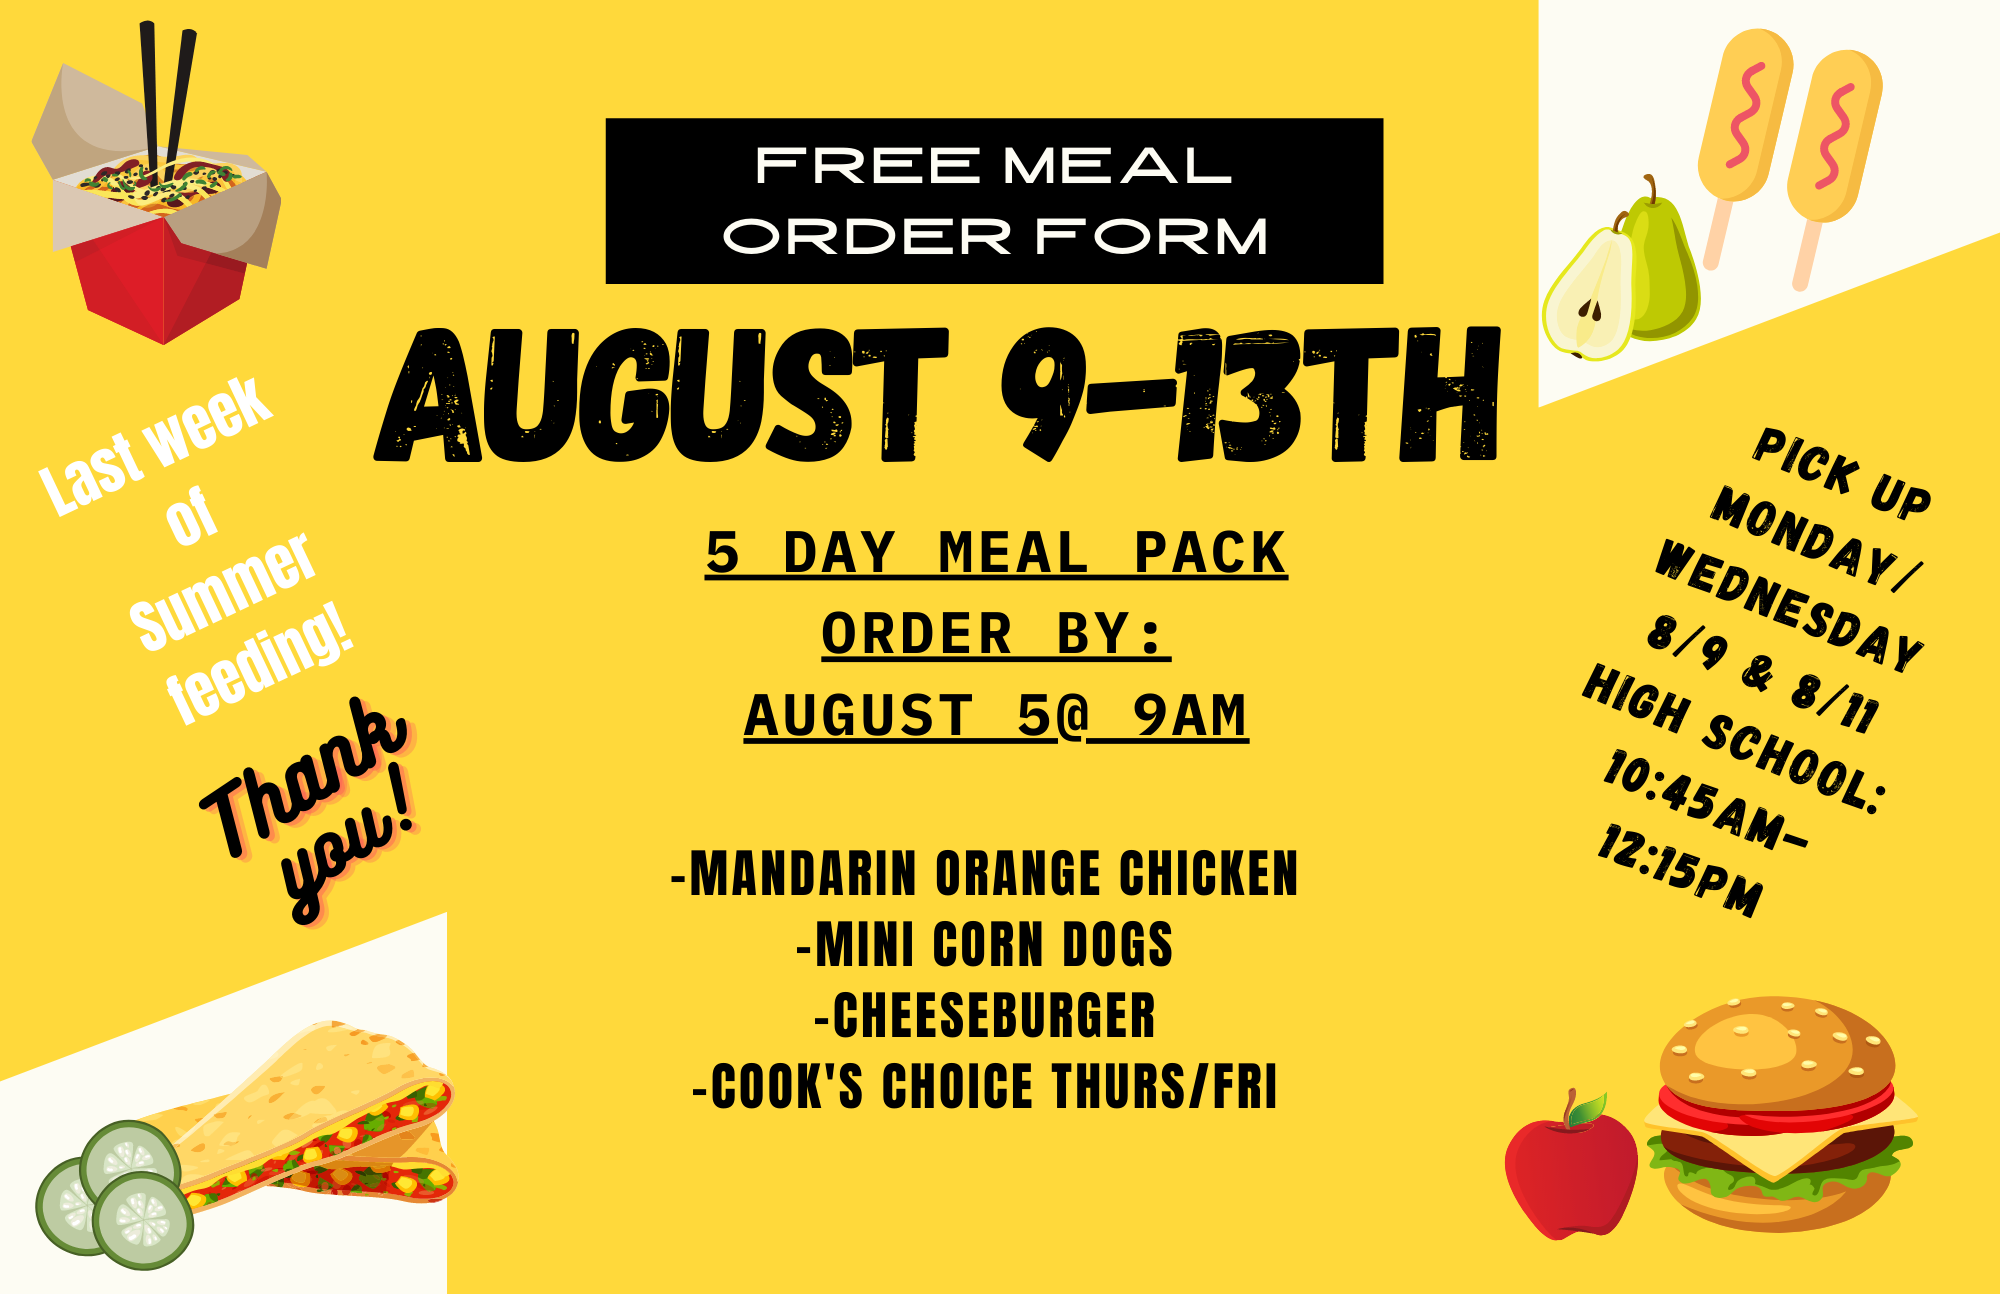 Last week for Free Meals – Order by 9 am, 8/5/2021